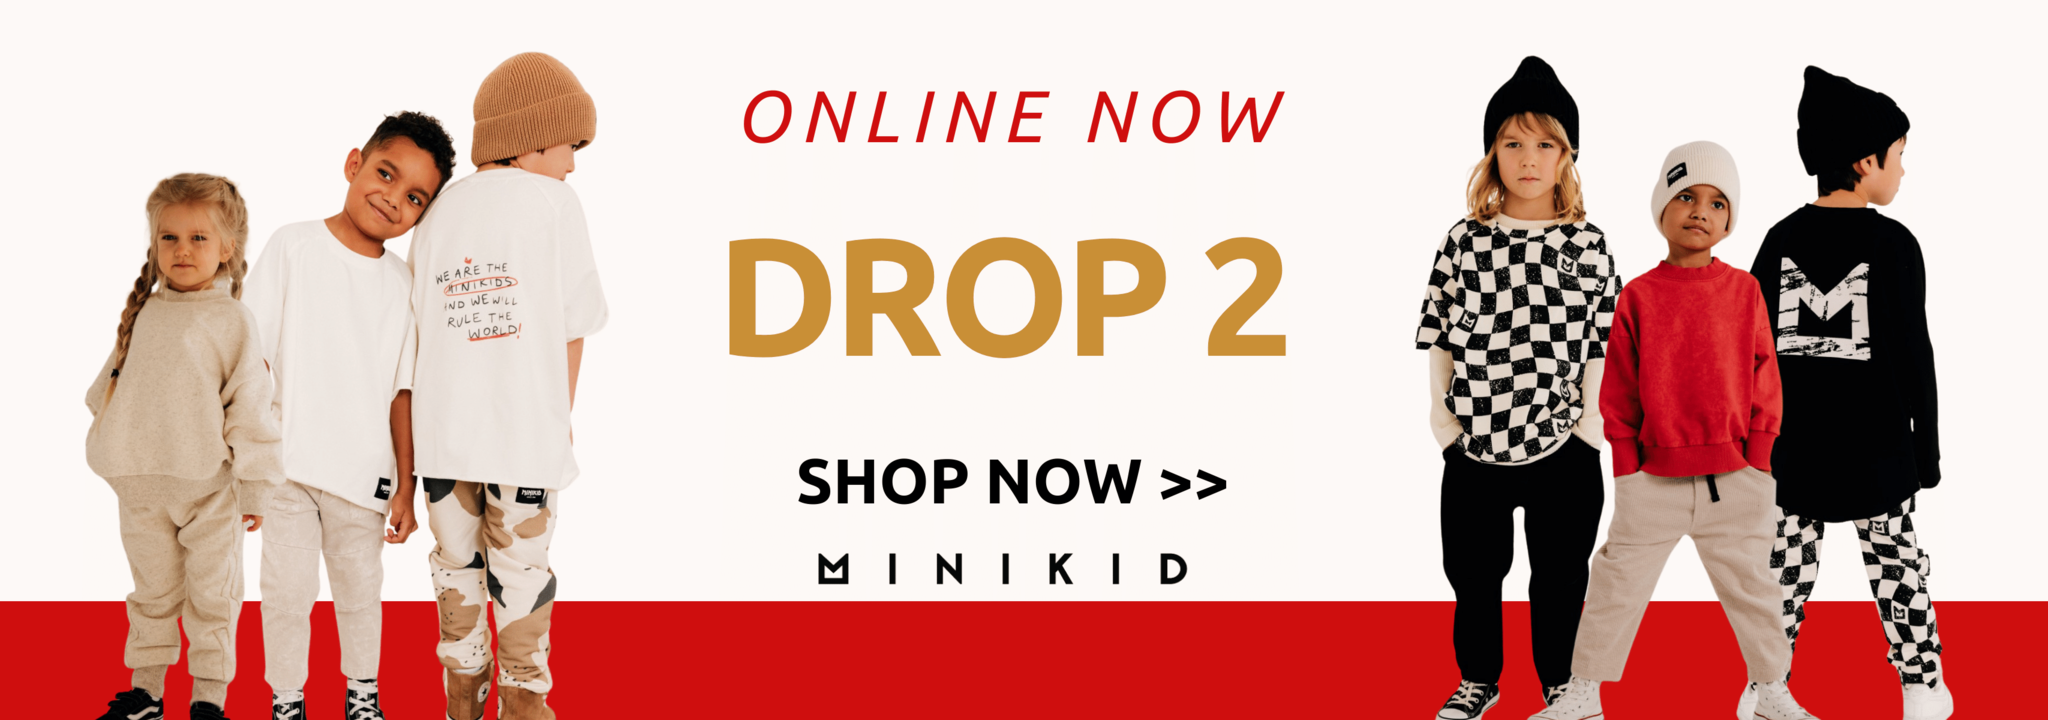 cool children's clothing buy baby clothes online minis only minikid streetwear